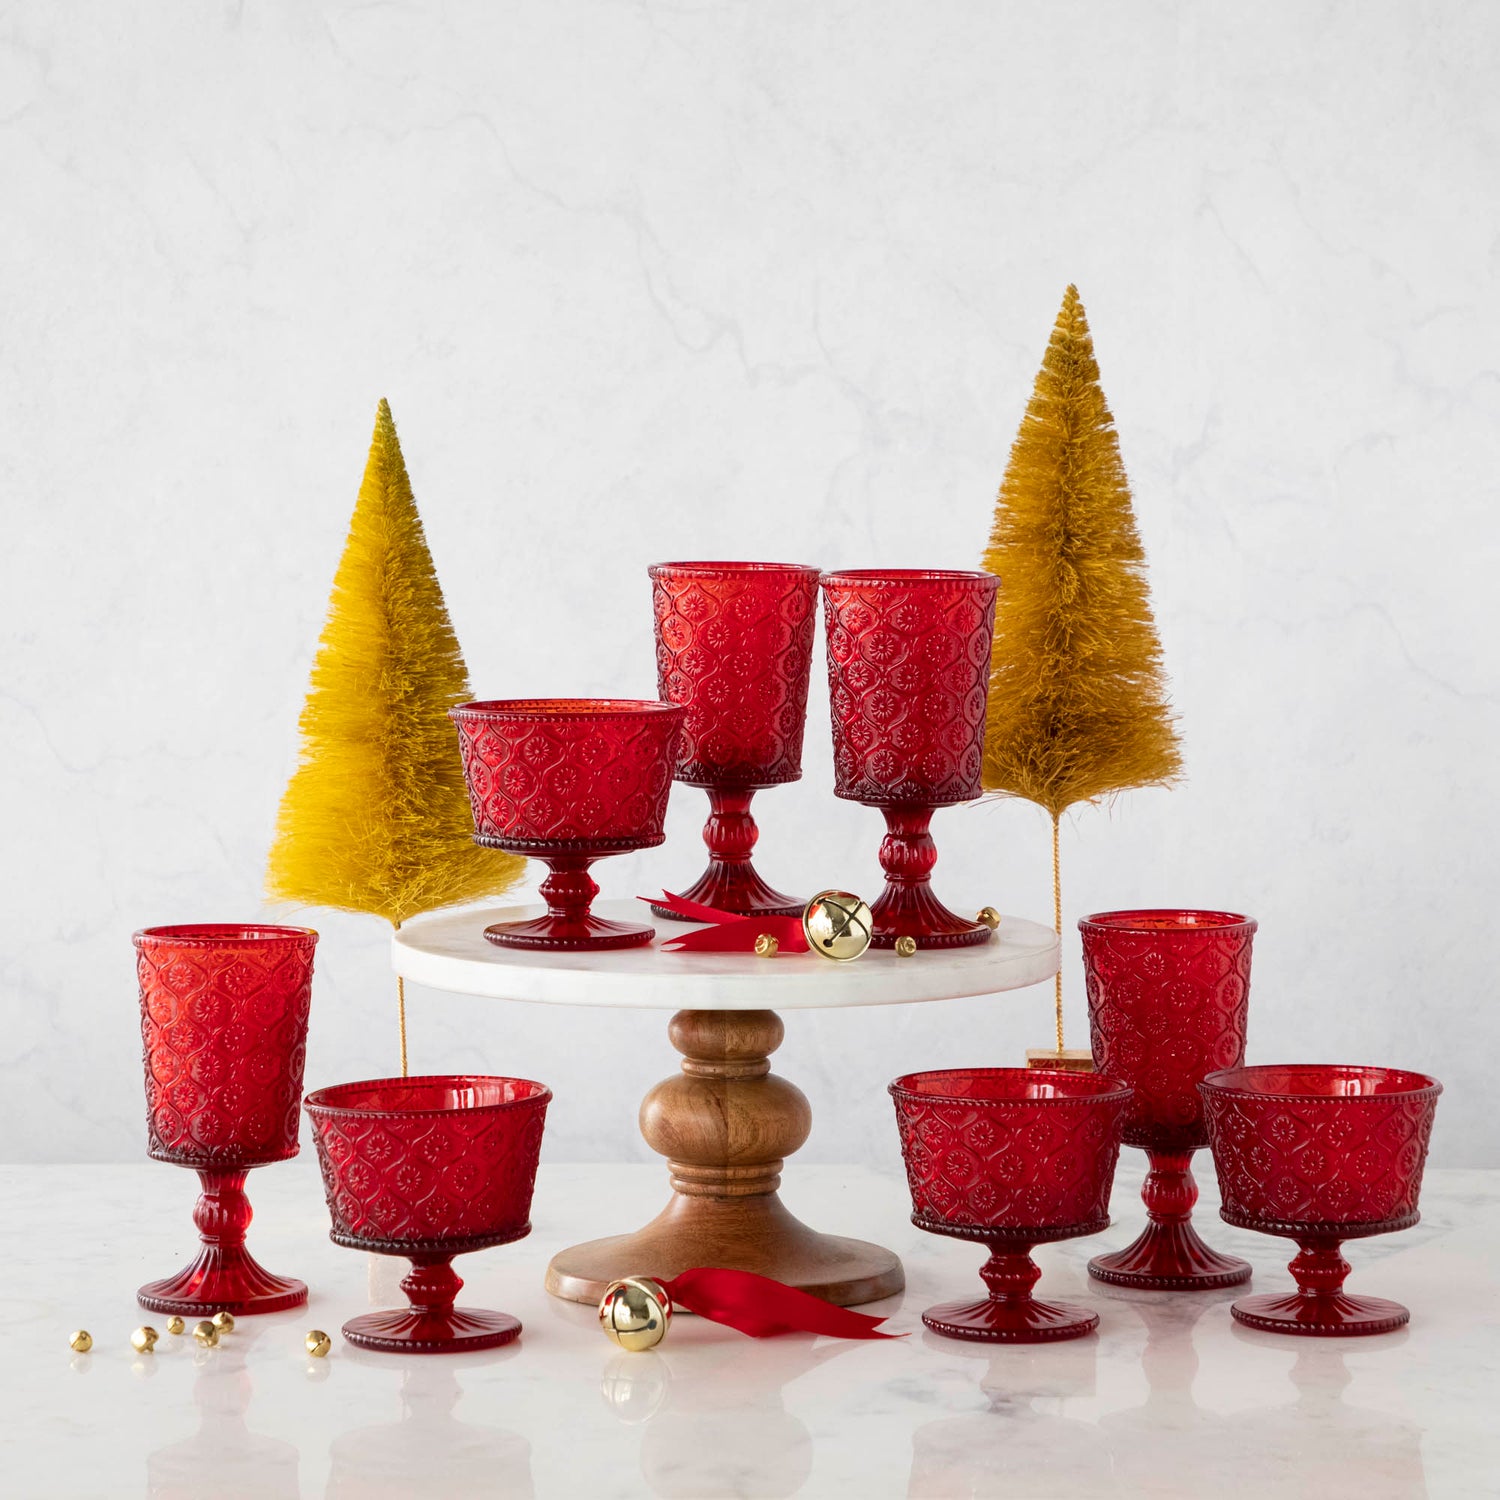 Elegant Qualia red pressed glassware set displayed on a white cake stand with wooden pedestal, flanked by green topiary balls on a marble background.